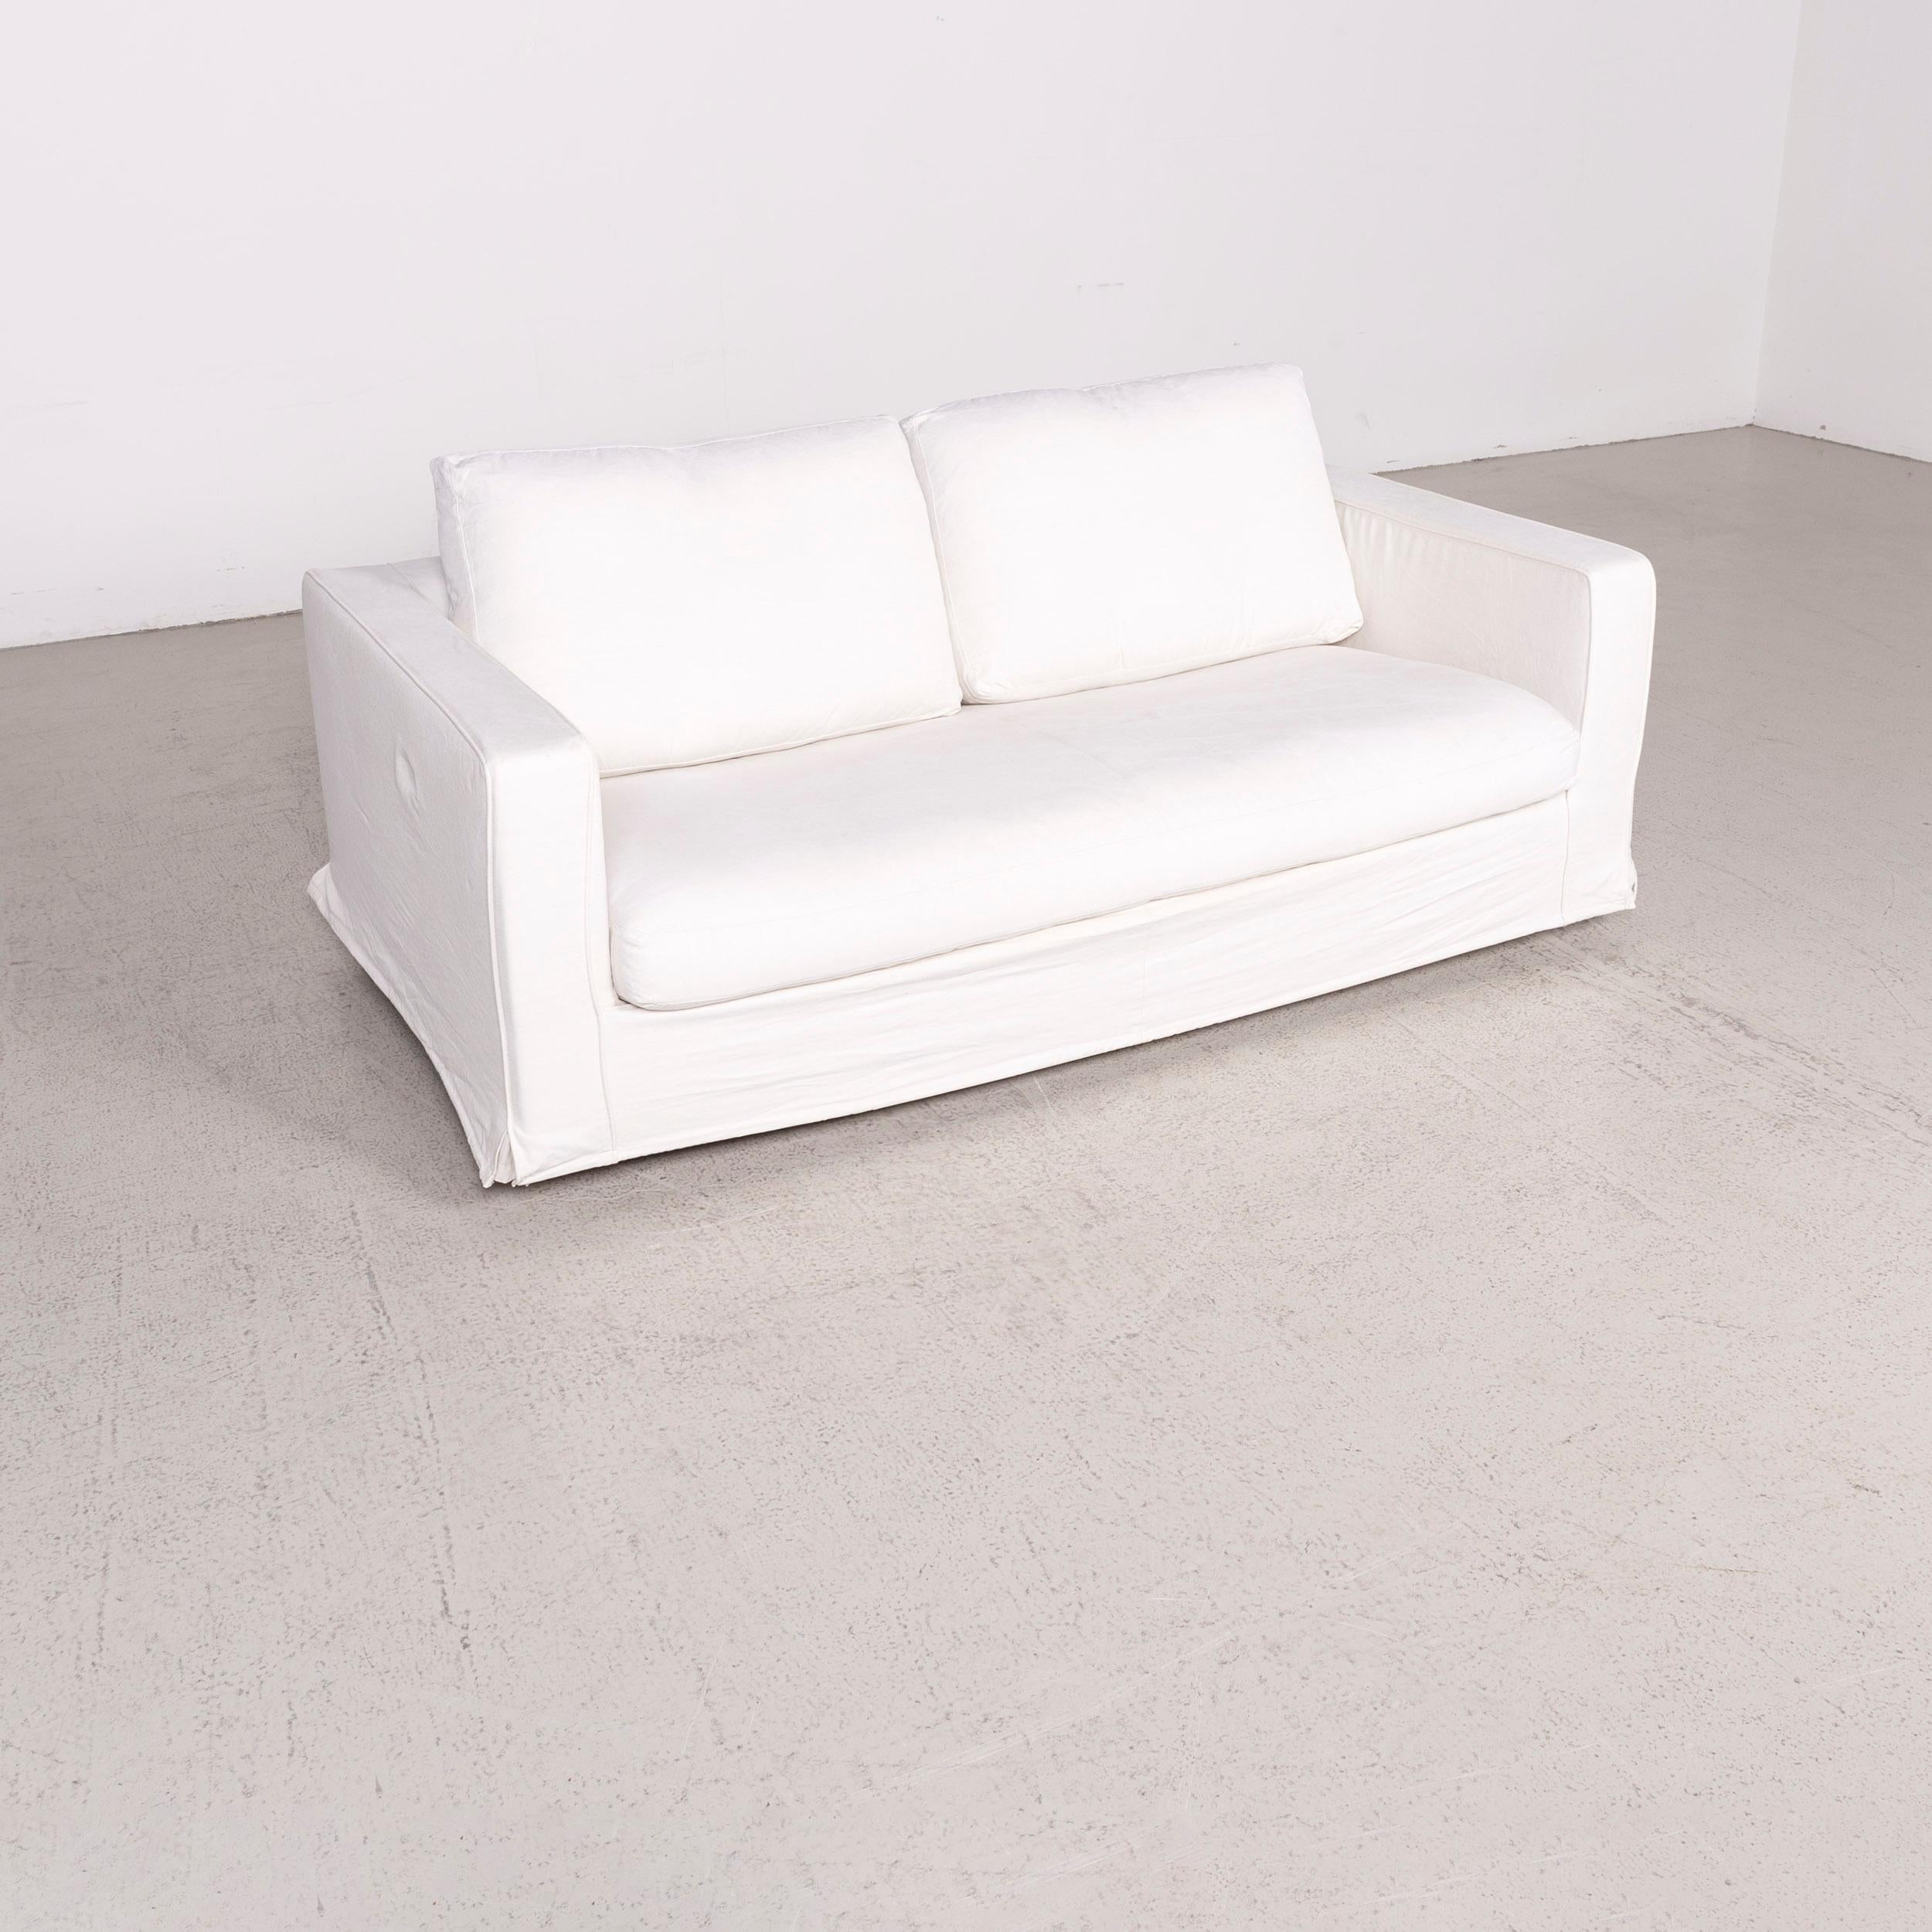 We bring to you a B & B Italia Baisity designer fabric sofa white by Antonio Citterio two-seat.

Product measurements in centimeters:

Depth 100
Width 175
Height 80
Seat-height 40
Rest-height 60
Seat-depth 50
Seat-width 145
Back-height